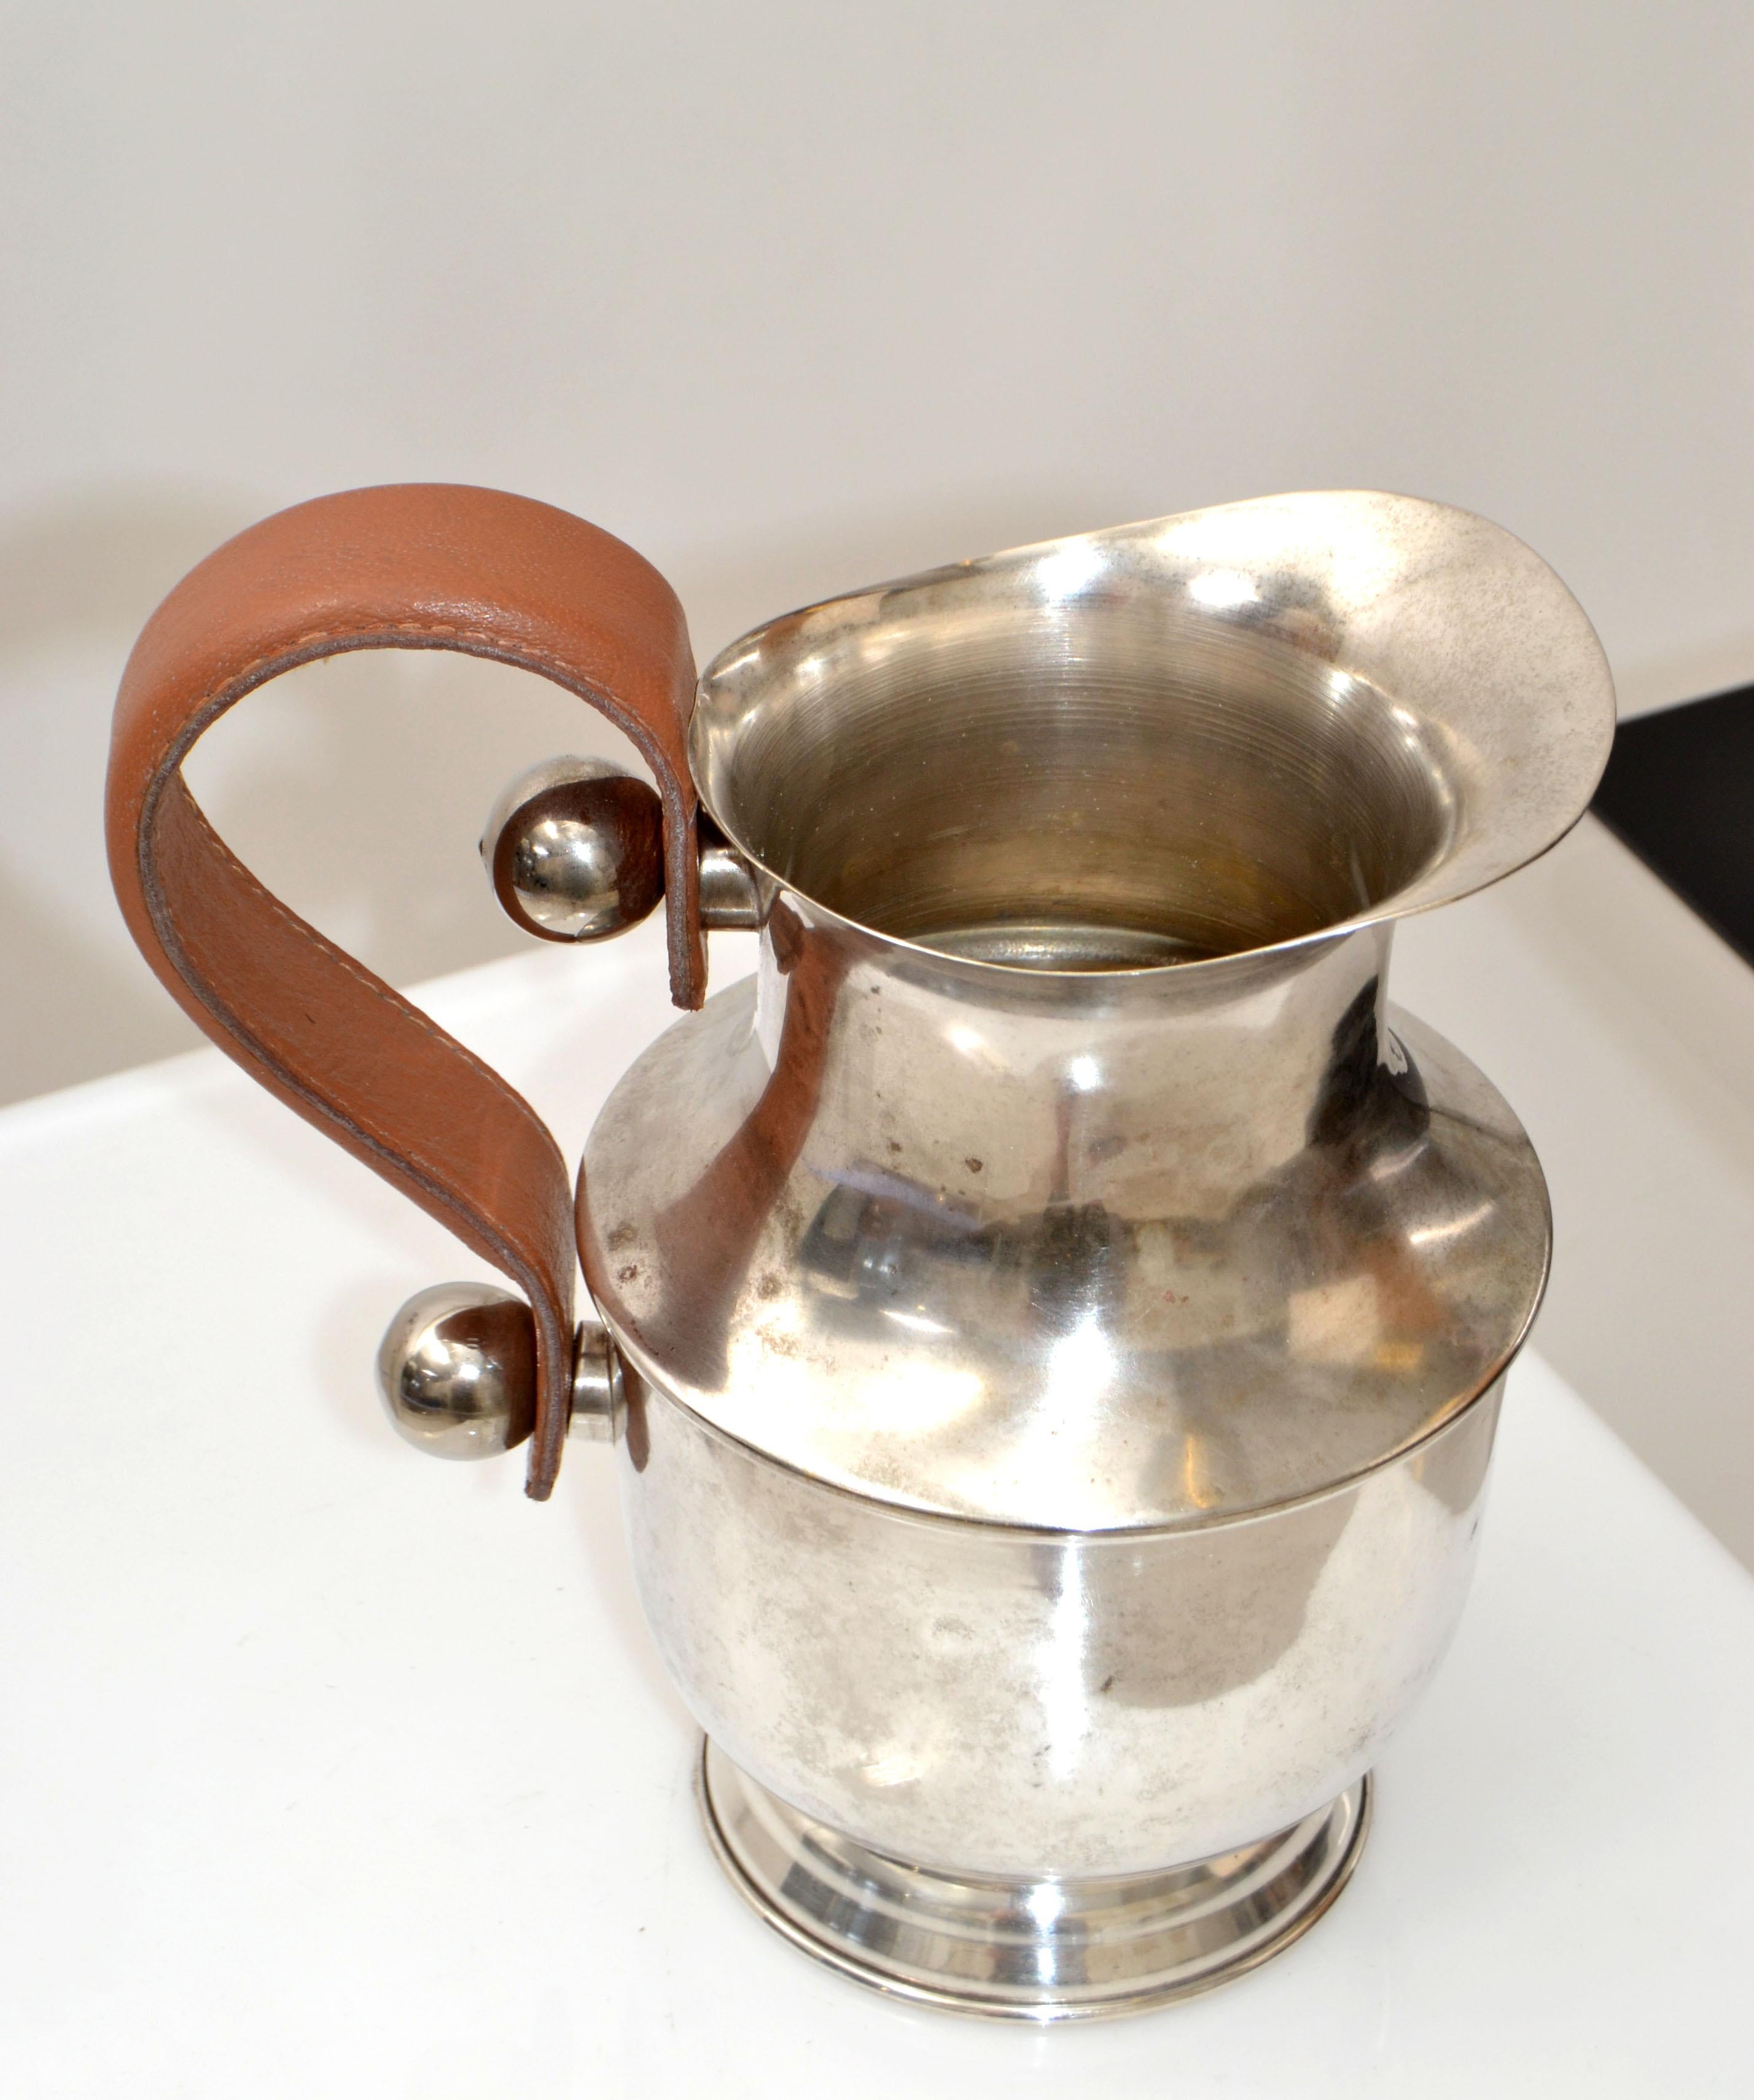 Hand-Crafted Hermès Style Mid-Century Modern Silver Plate over Nickel Decanter, Vessel Carafe